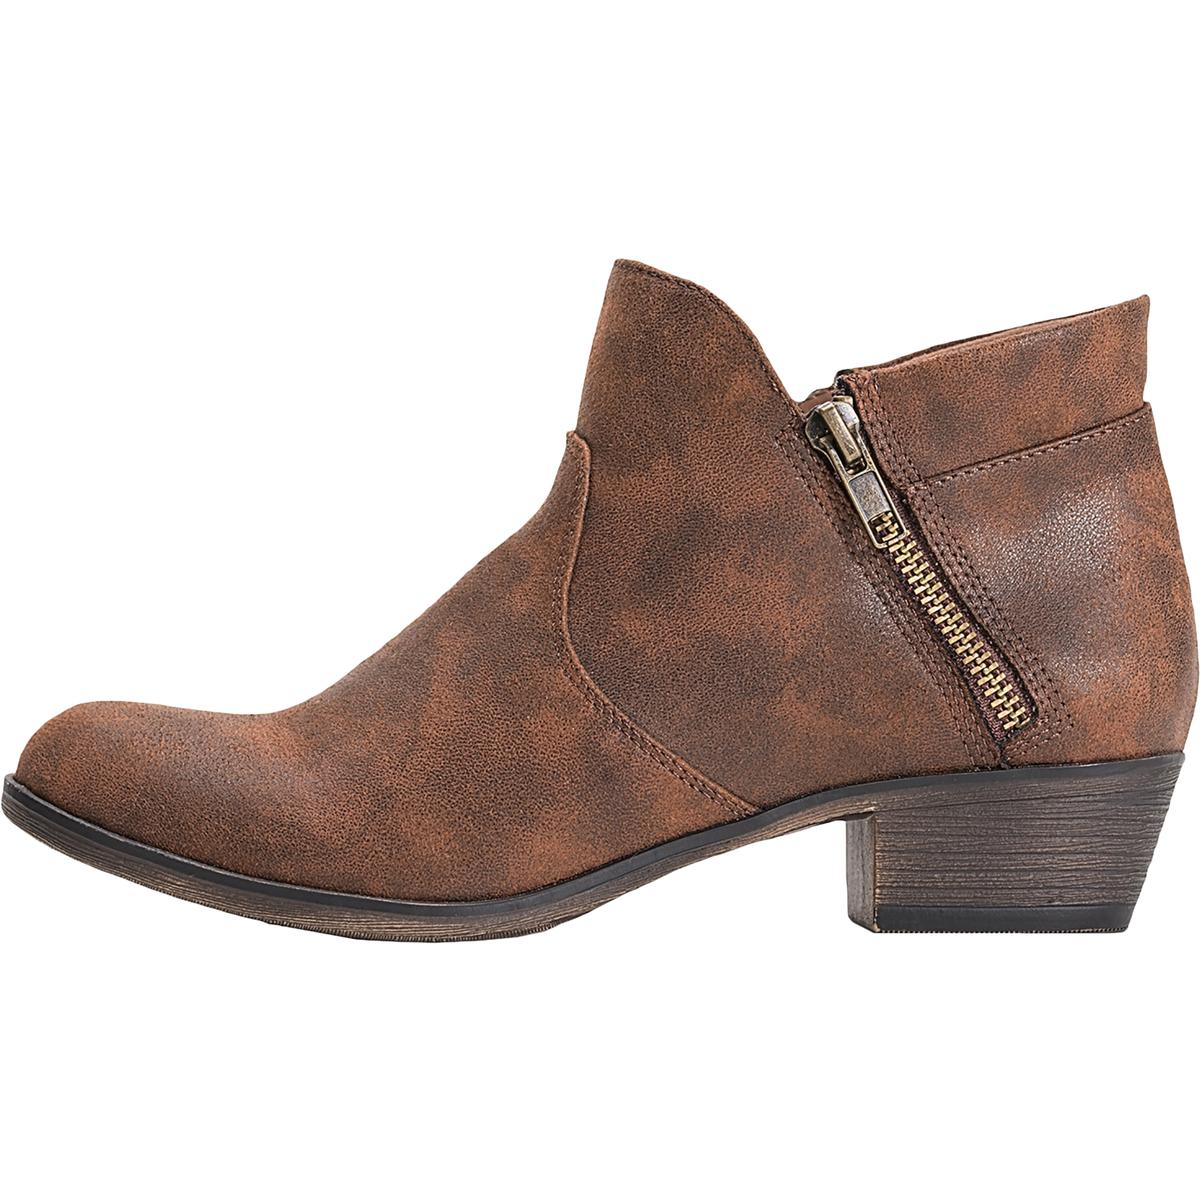 American Rag Womens Abby Stacked Ankle Booties Shoes BHFO 2060 | eBay